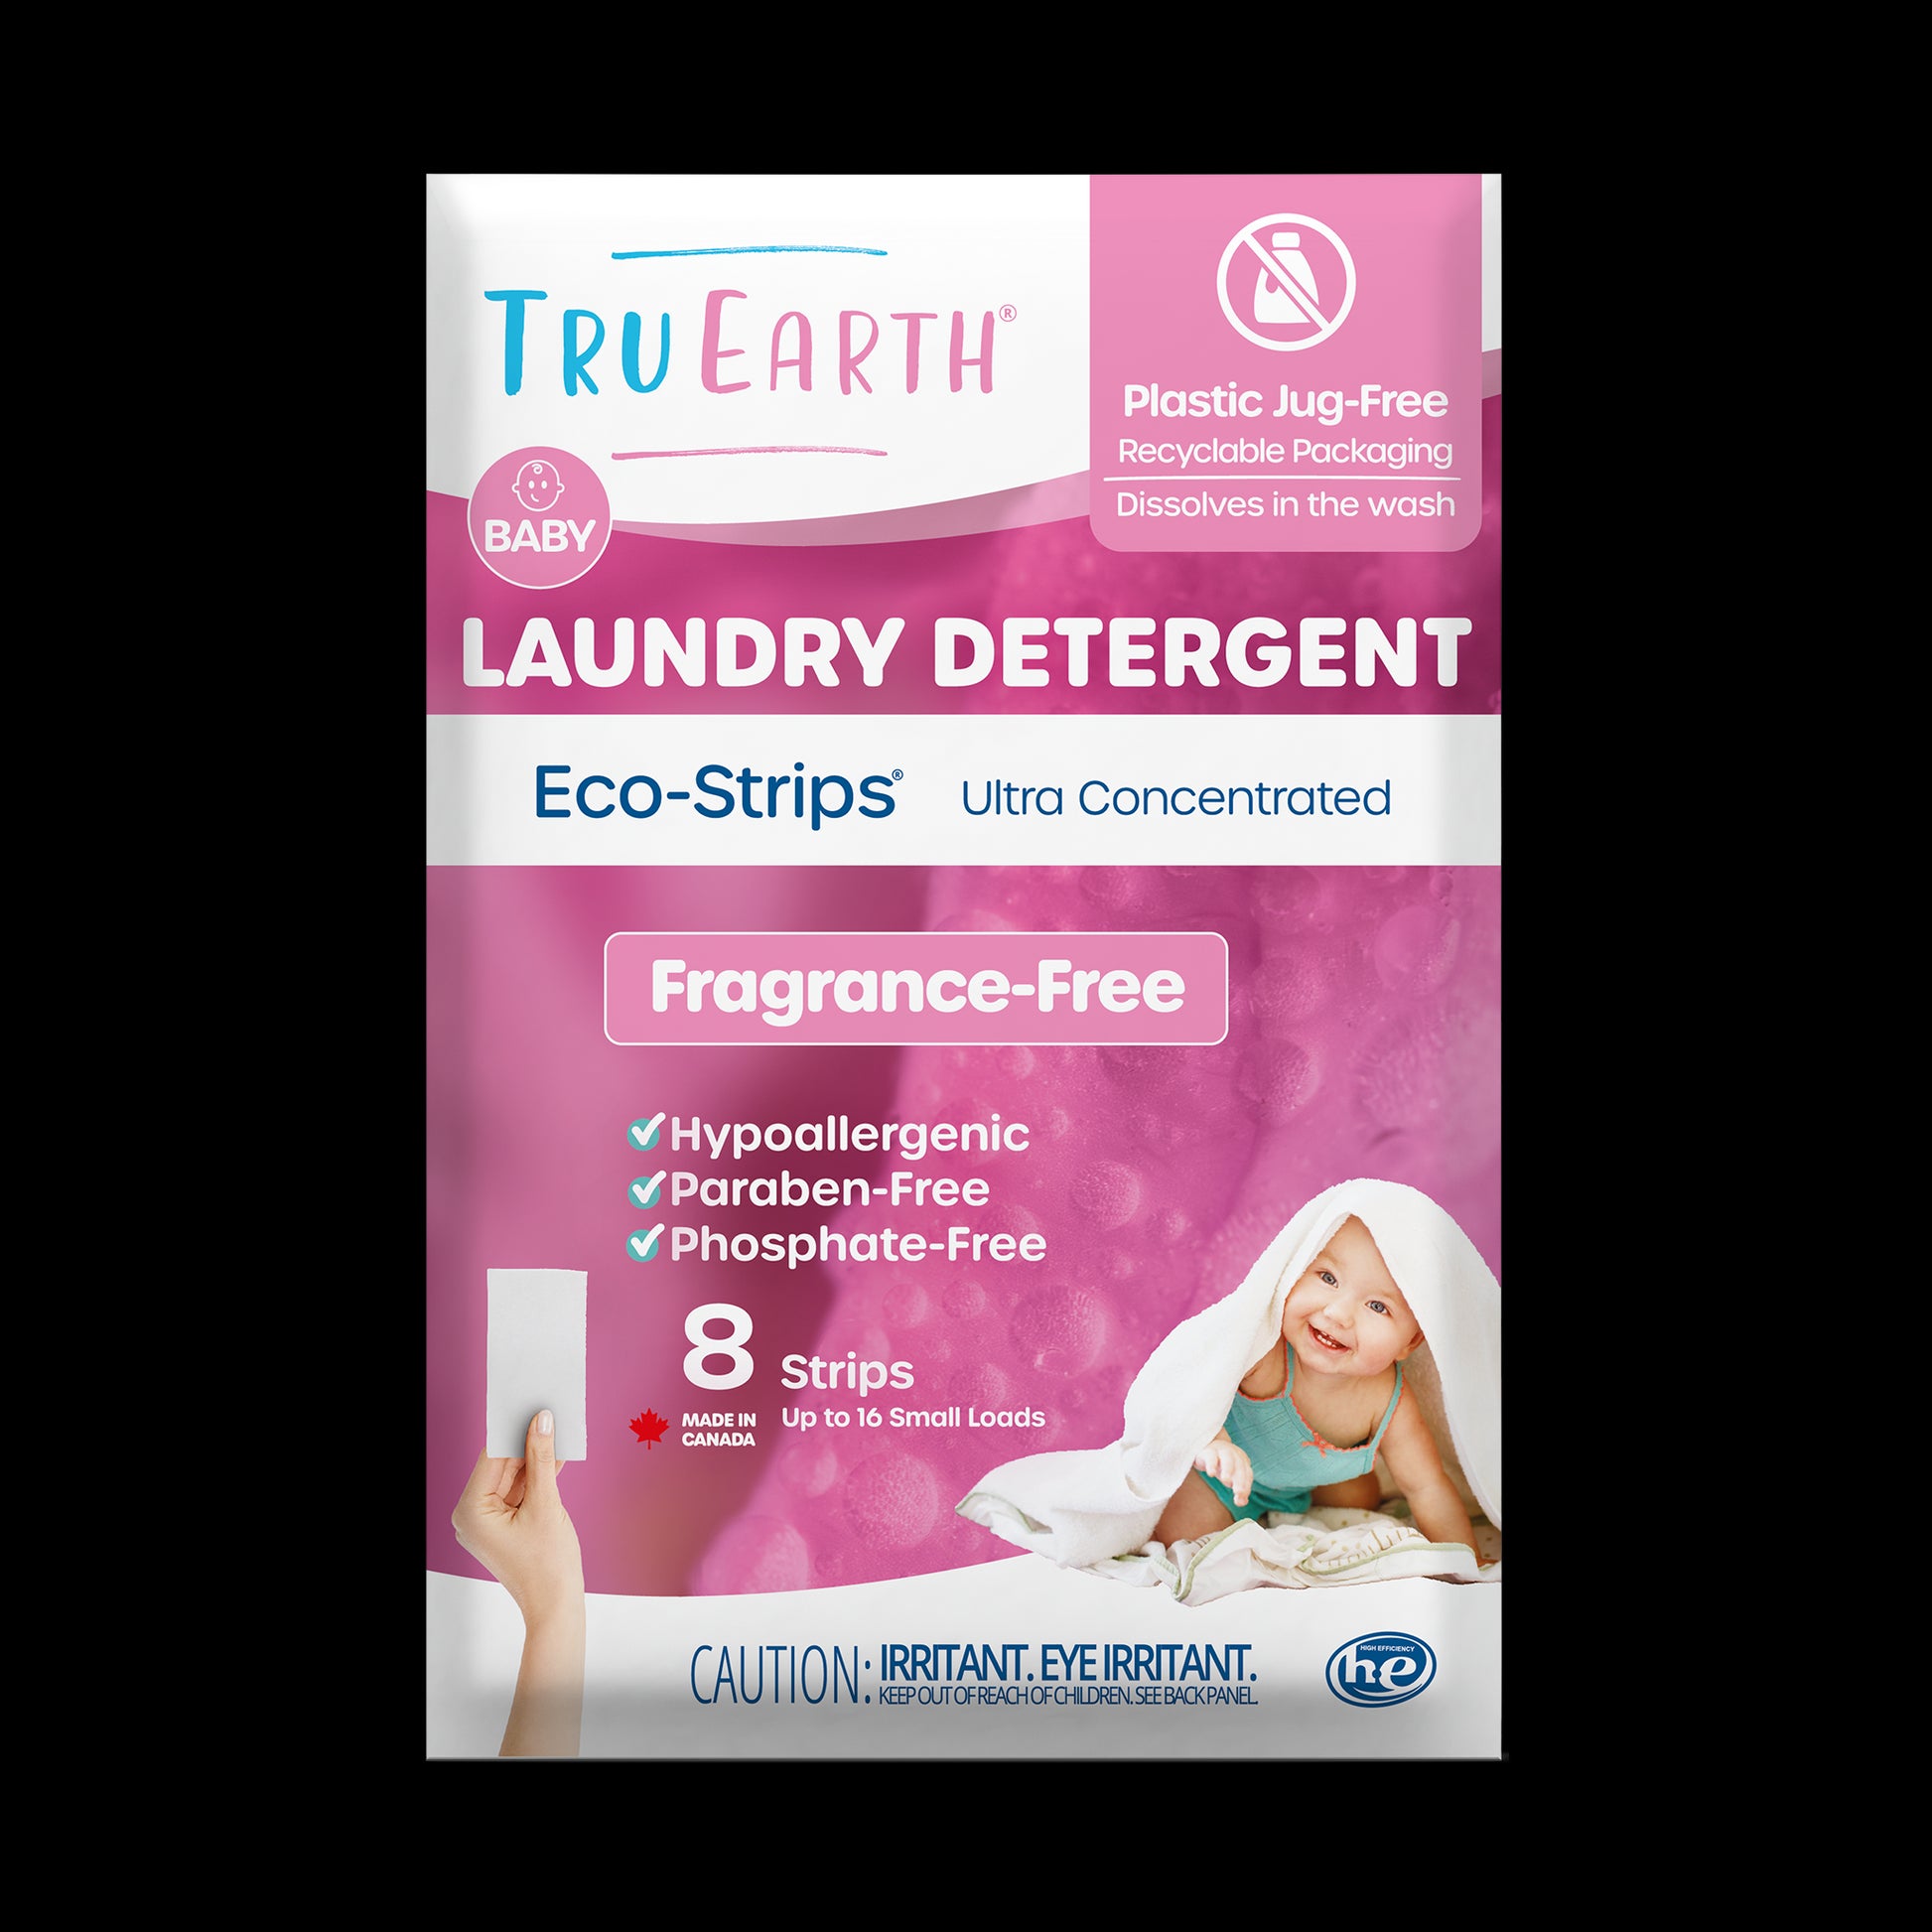 TruEarth Laundry Detergent Baby Fragrance-Free Front of Package